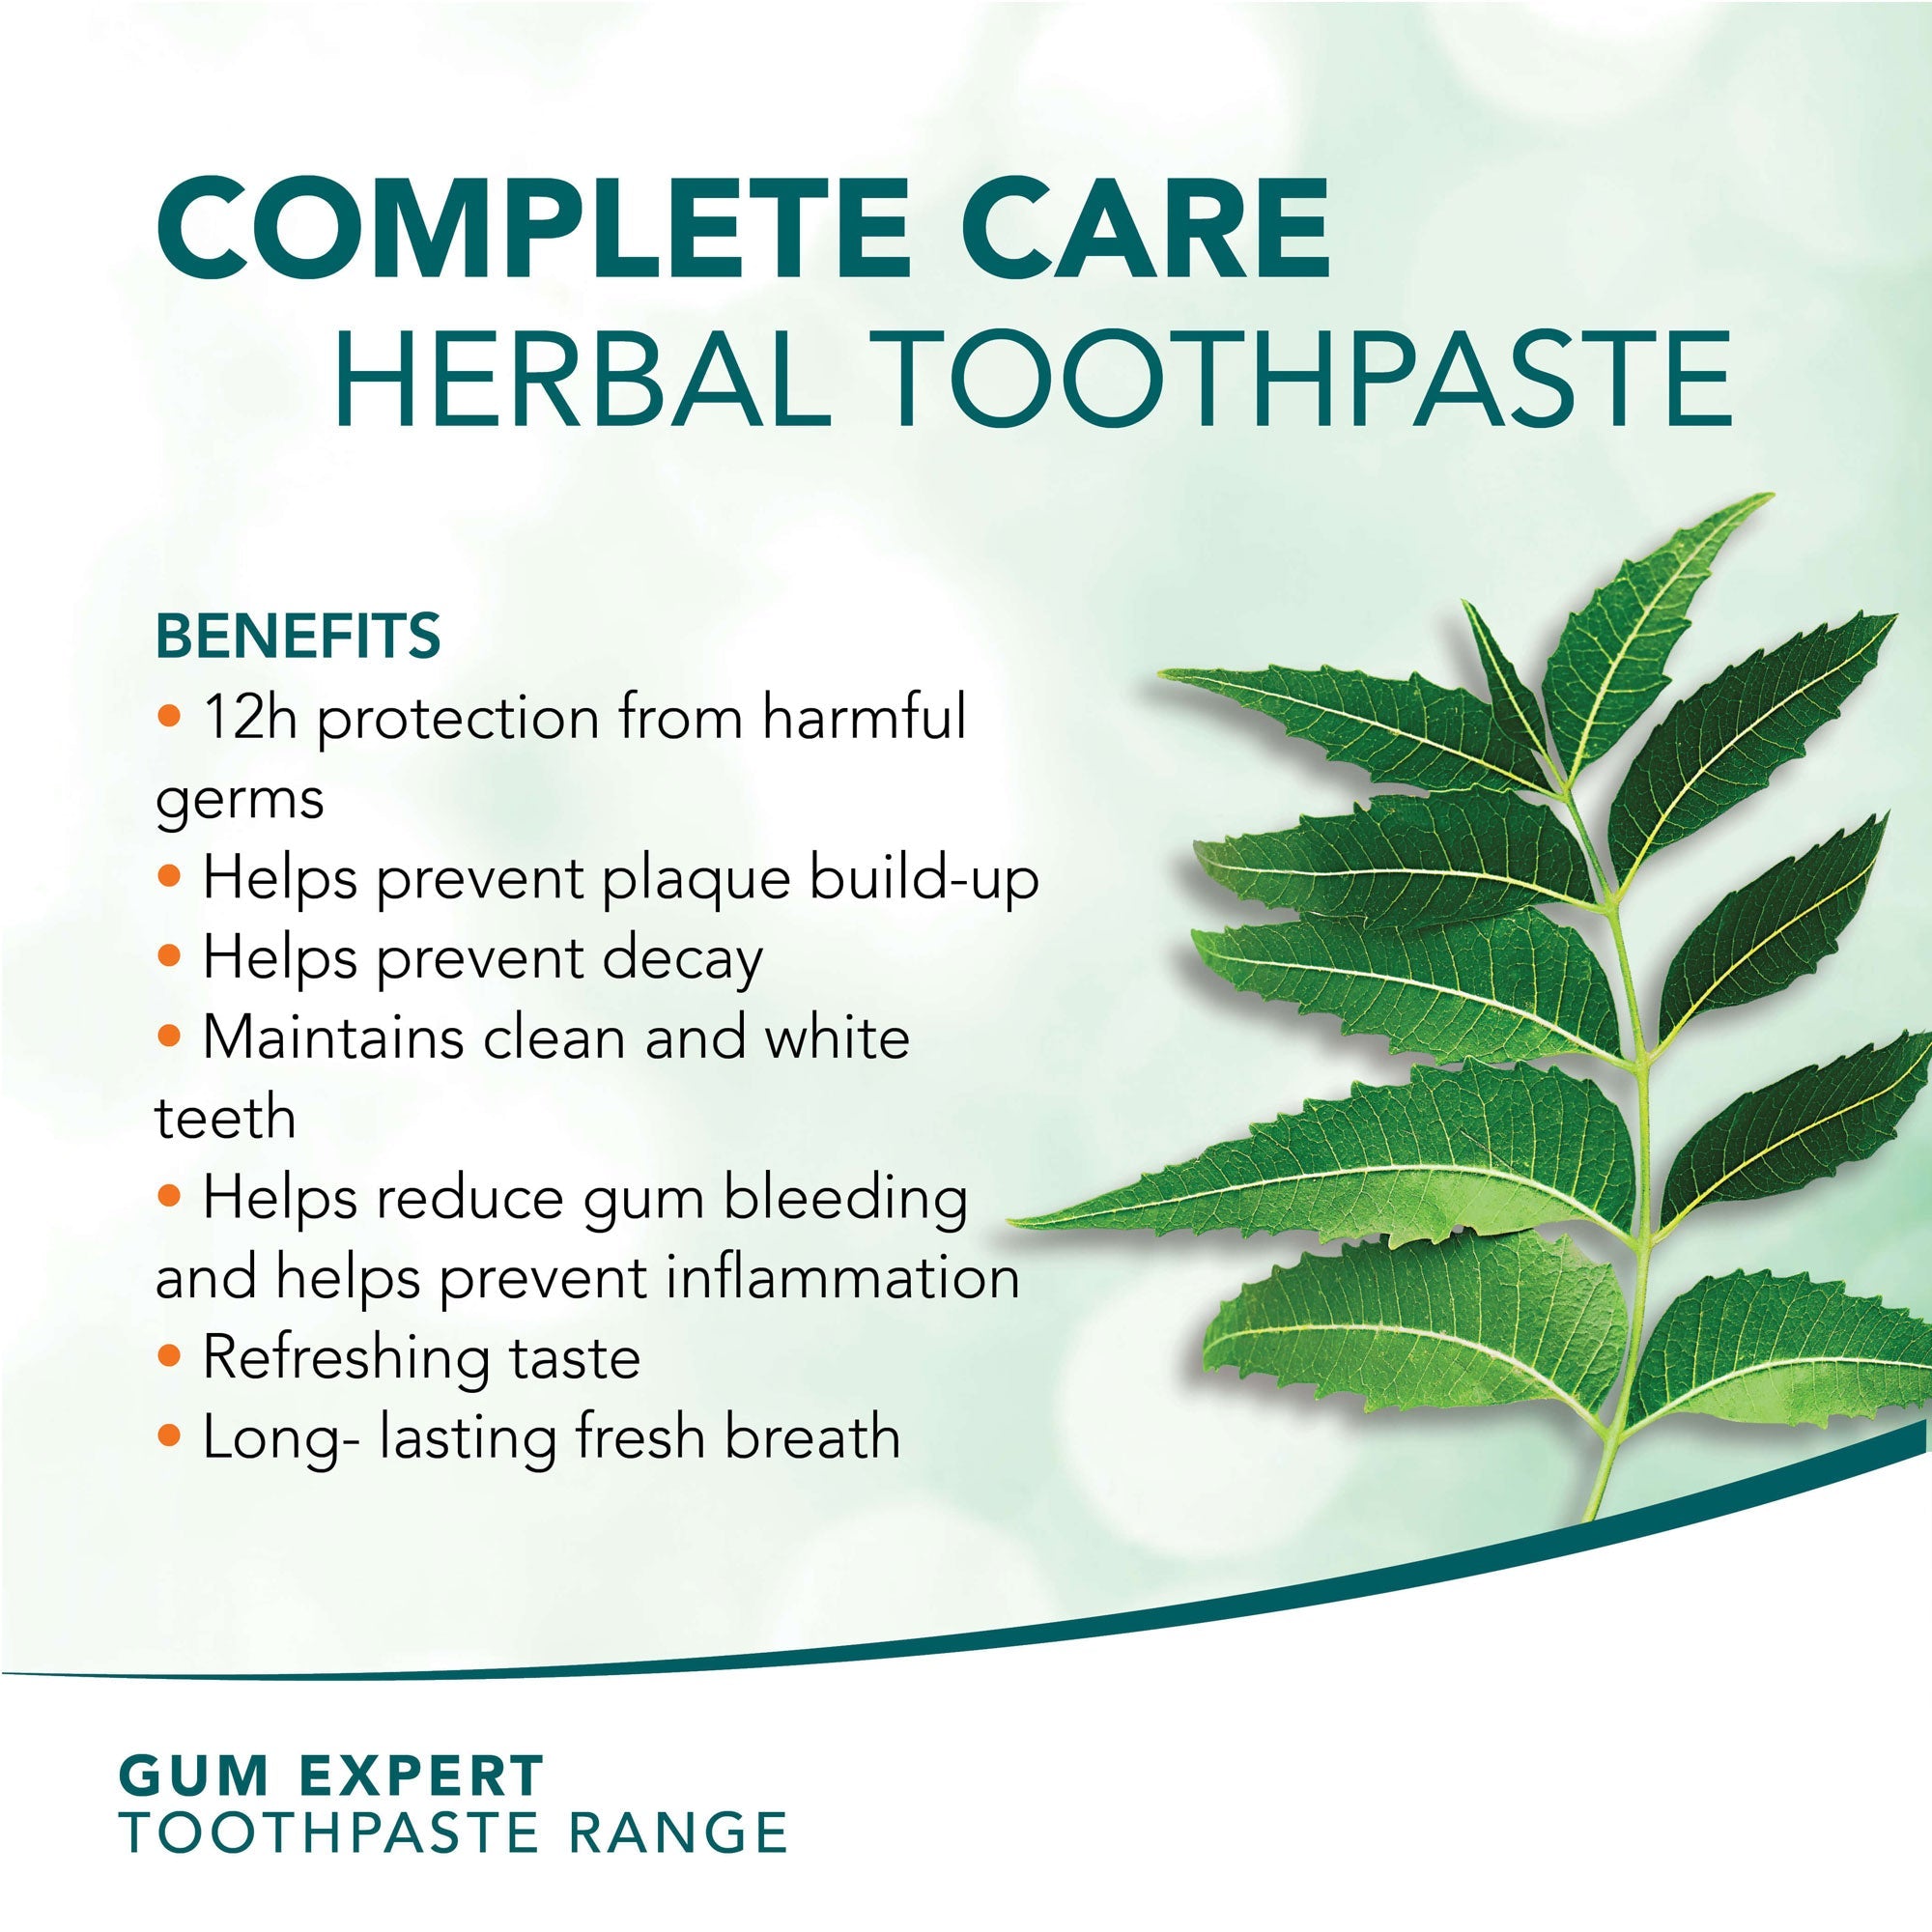 Himalaya Gum Expert Herbal Toothpaste - Complete Care - 75ml (Pack of 3)